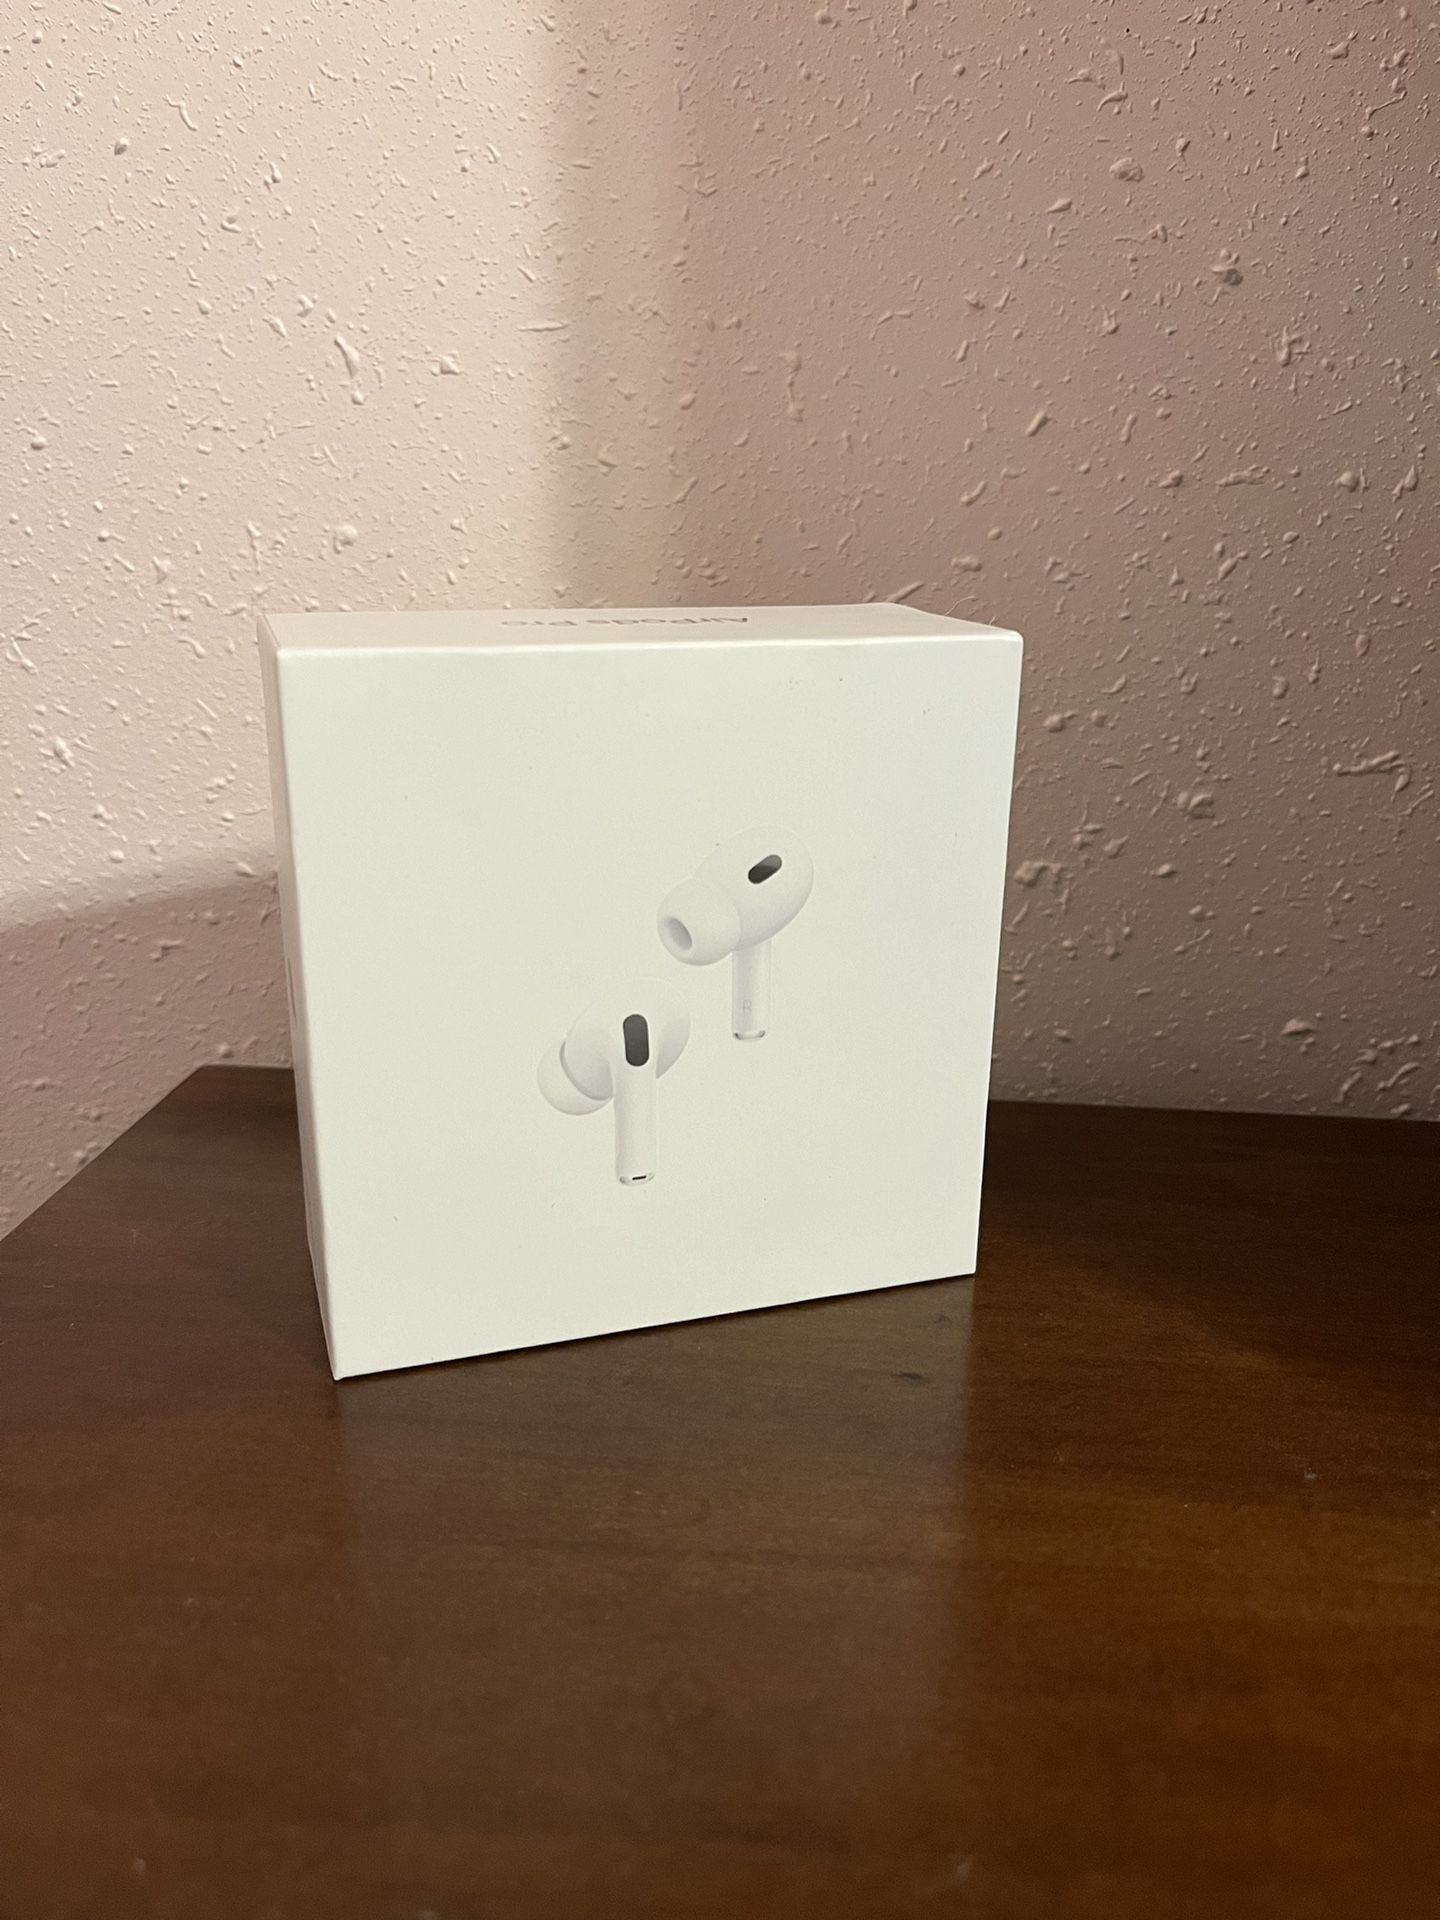 Apple AirPod Pros 2nd Generation White 